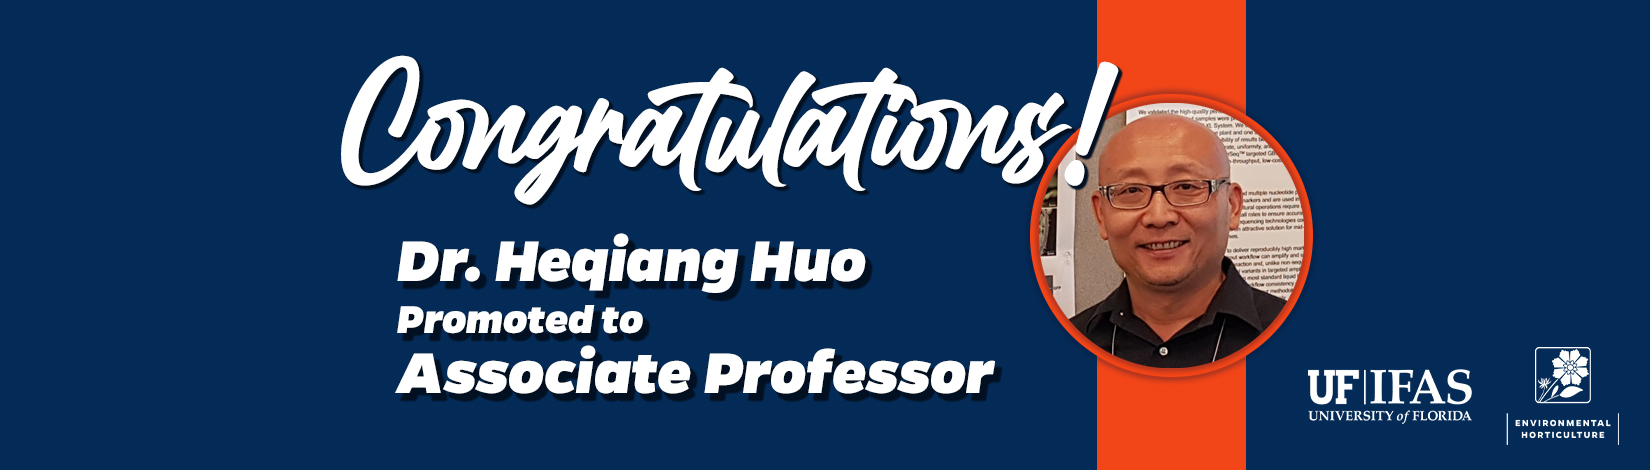 Dr. Heqiang Huo promoted to Associate Professor